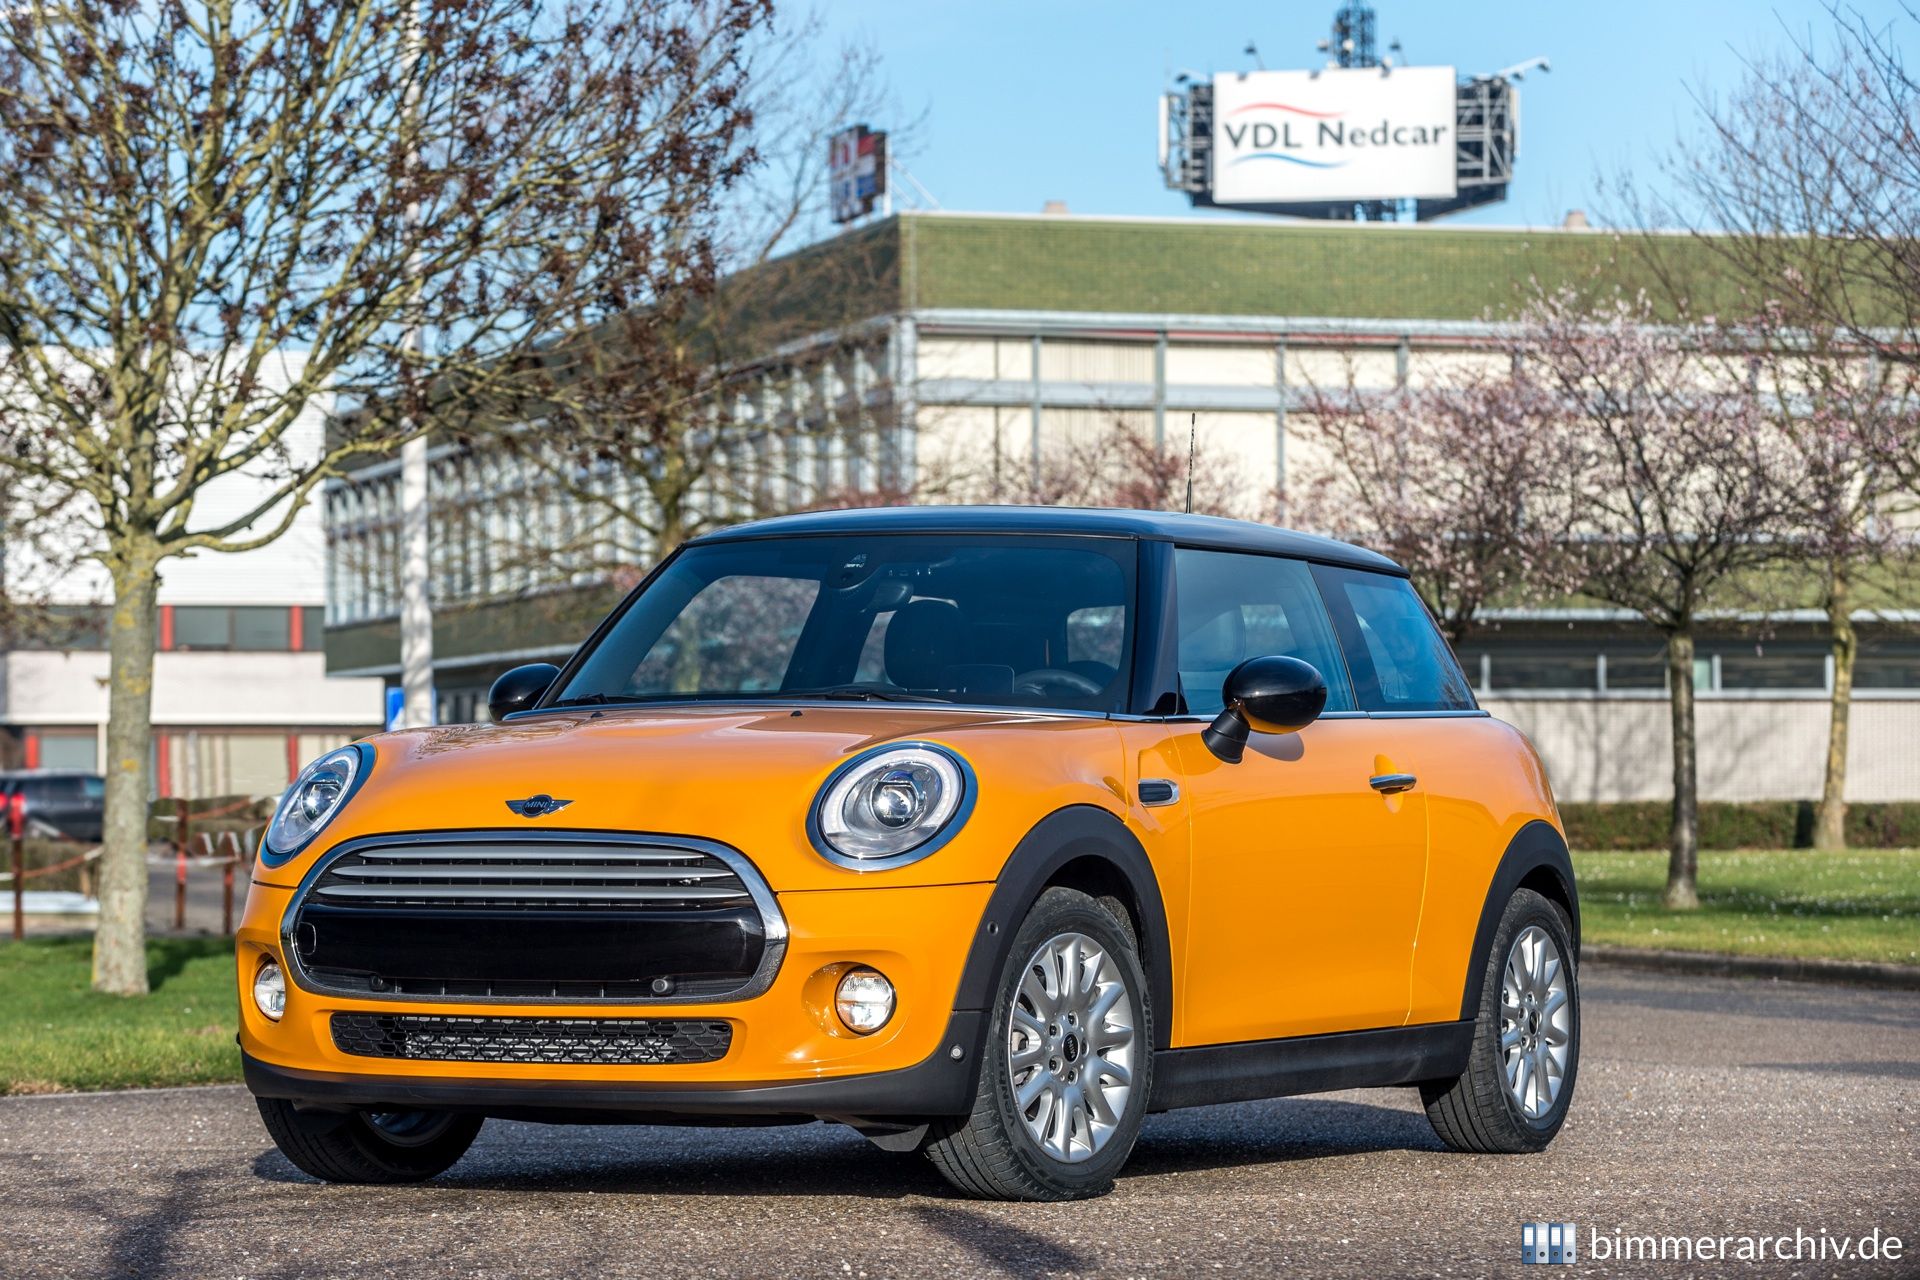 Contract manufacturing of the MINI at VDL Nedcar in Born